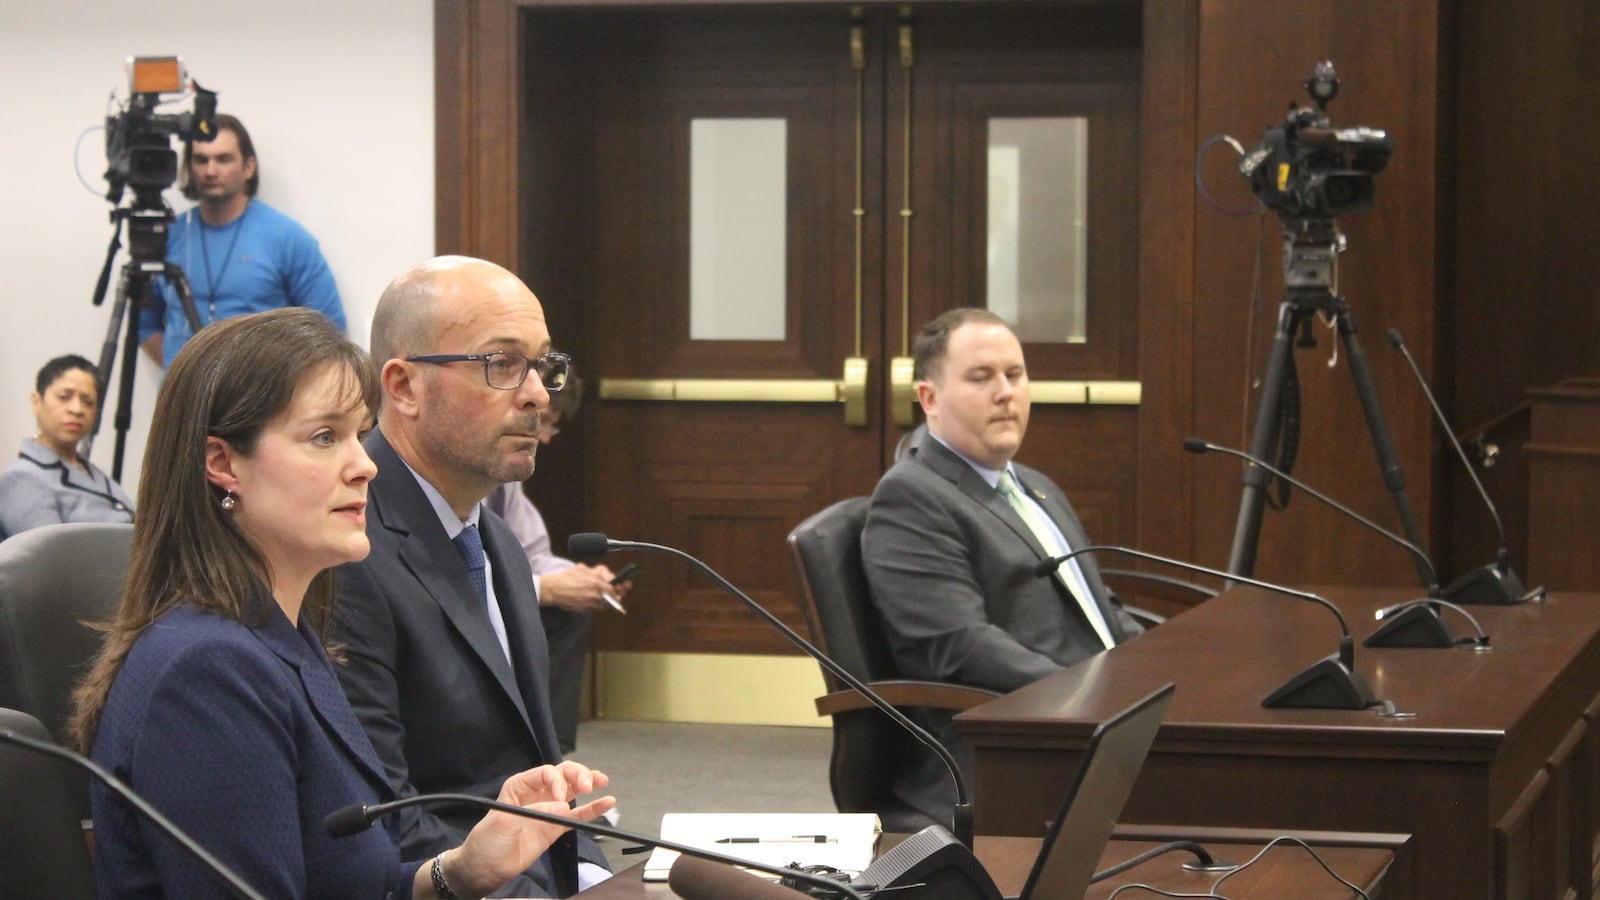 Tennessee Education Commissioner Candice McQueen testifies before state lawmakers about technical problems that stalled students' online TNReady tests in April of 2018, while Questar executive Brad Baumgartner listens.